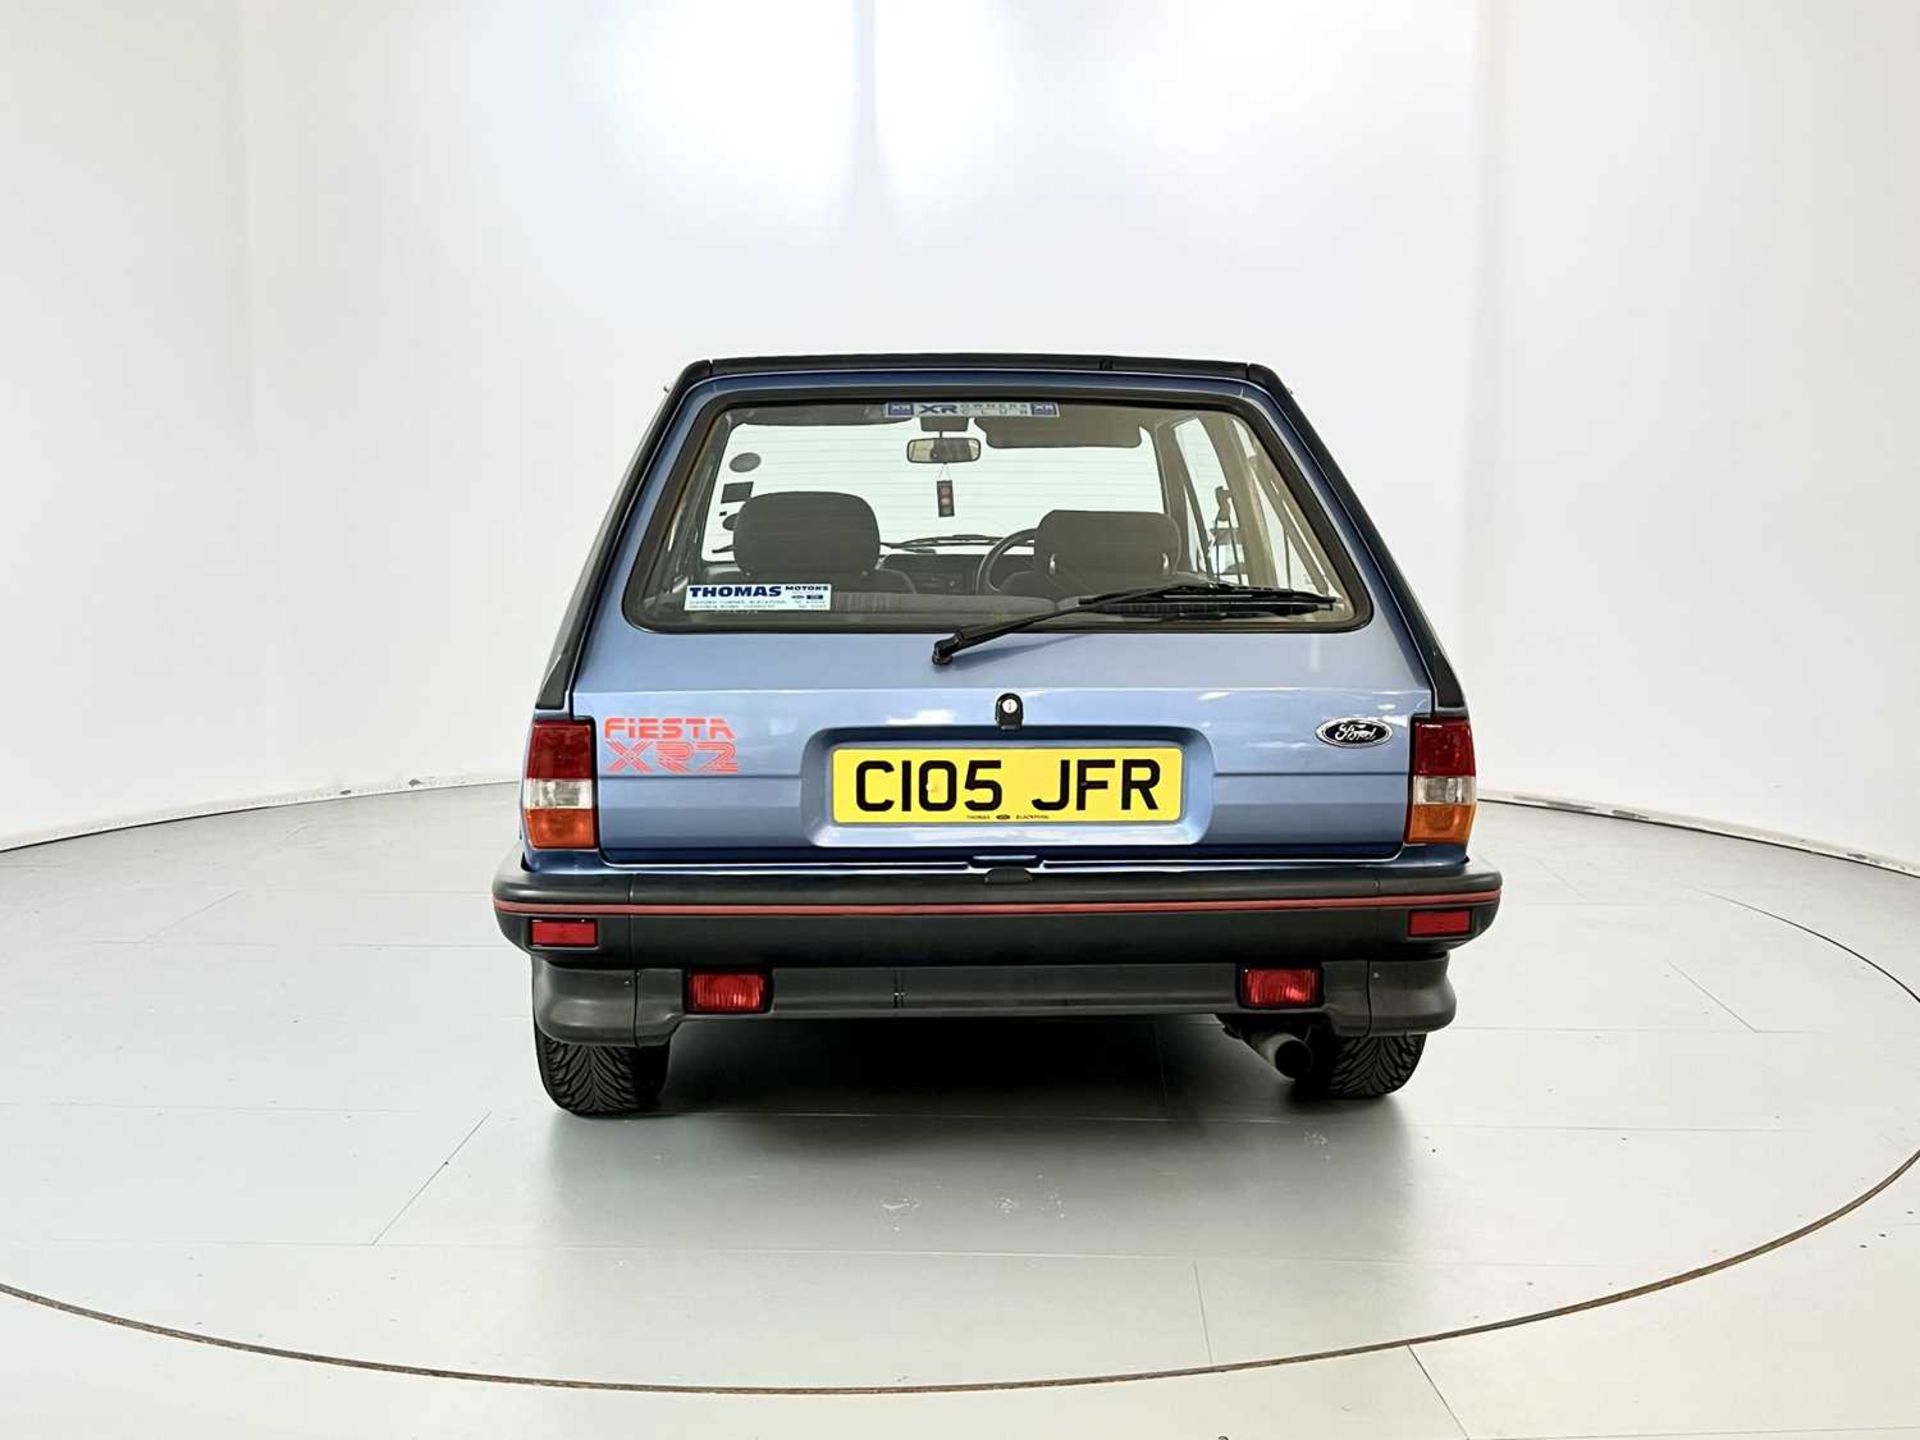 1986 Ford Fiesta XR2 - Image 8 of 33